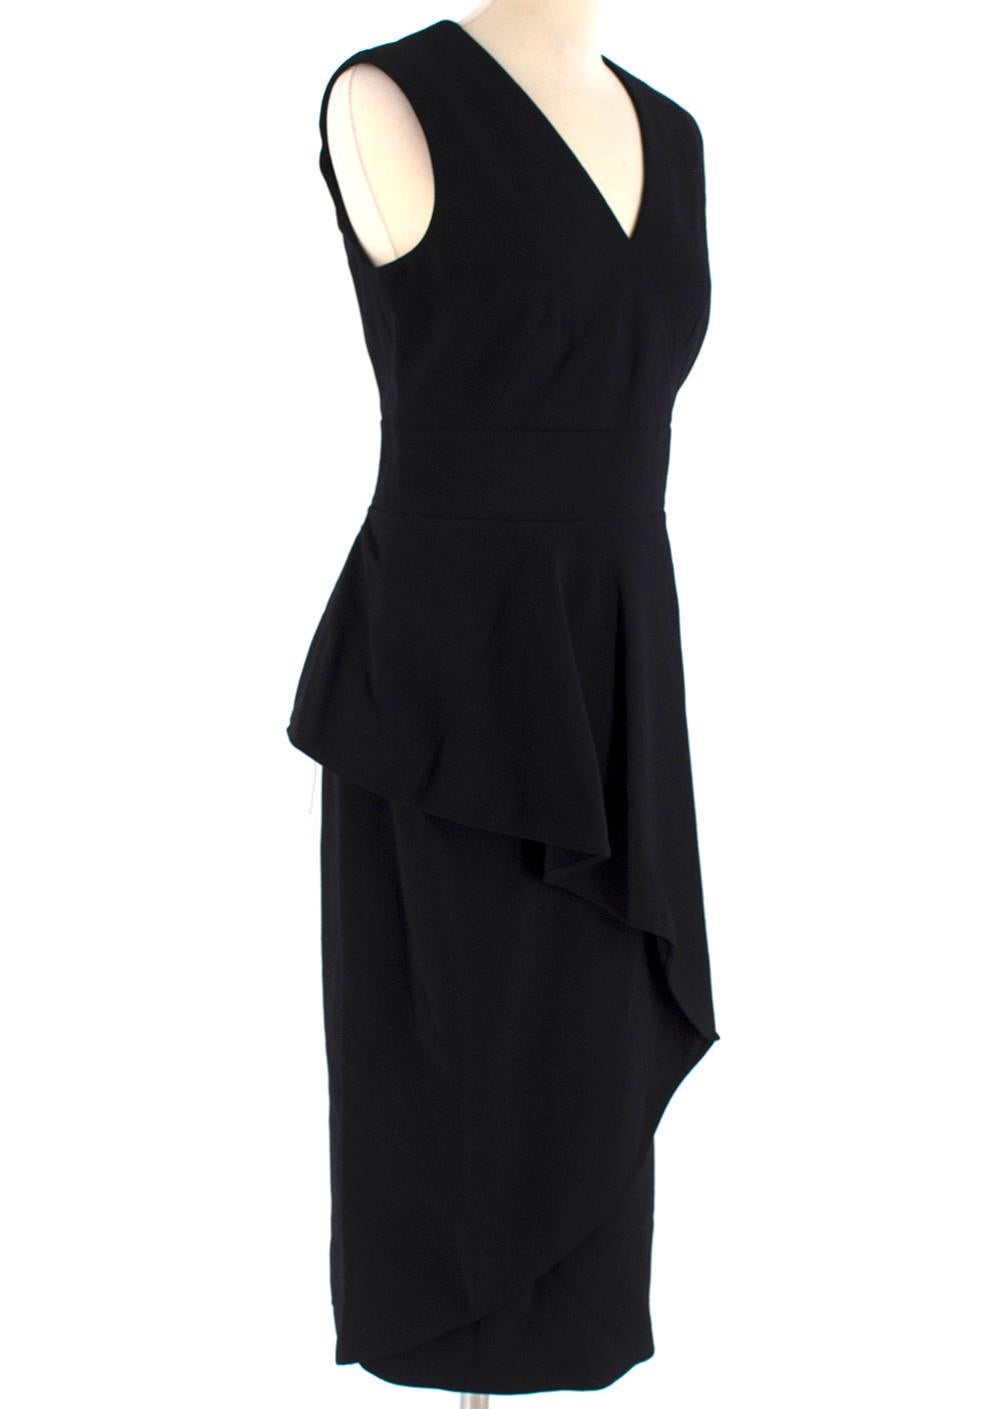 Alexander Mcqueen Asymmetric Peplum Crepe Dress

- V neck, black and long dress 
- Zip fastening at the back 
- Mid-weight
- Slim fit without sleeves 
- Curvy figure shape on the front 
- Black silk lining inside 

Please note, these items are